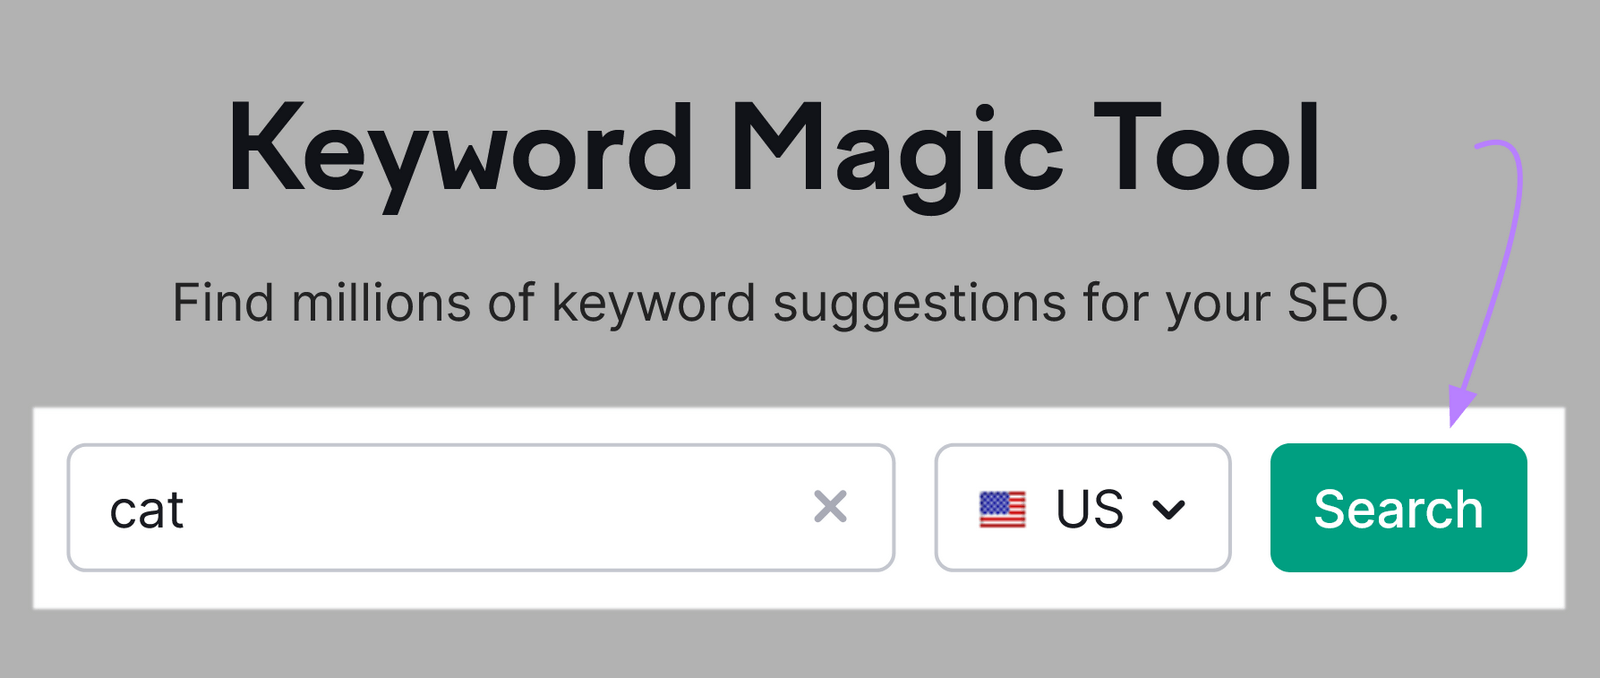 Keyword Magic Tool home with "cat" entered and the "Search" button highlighted.